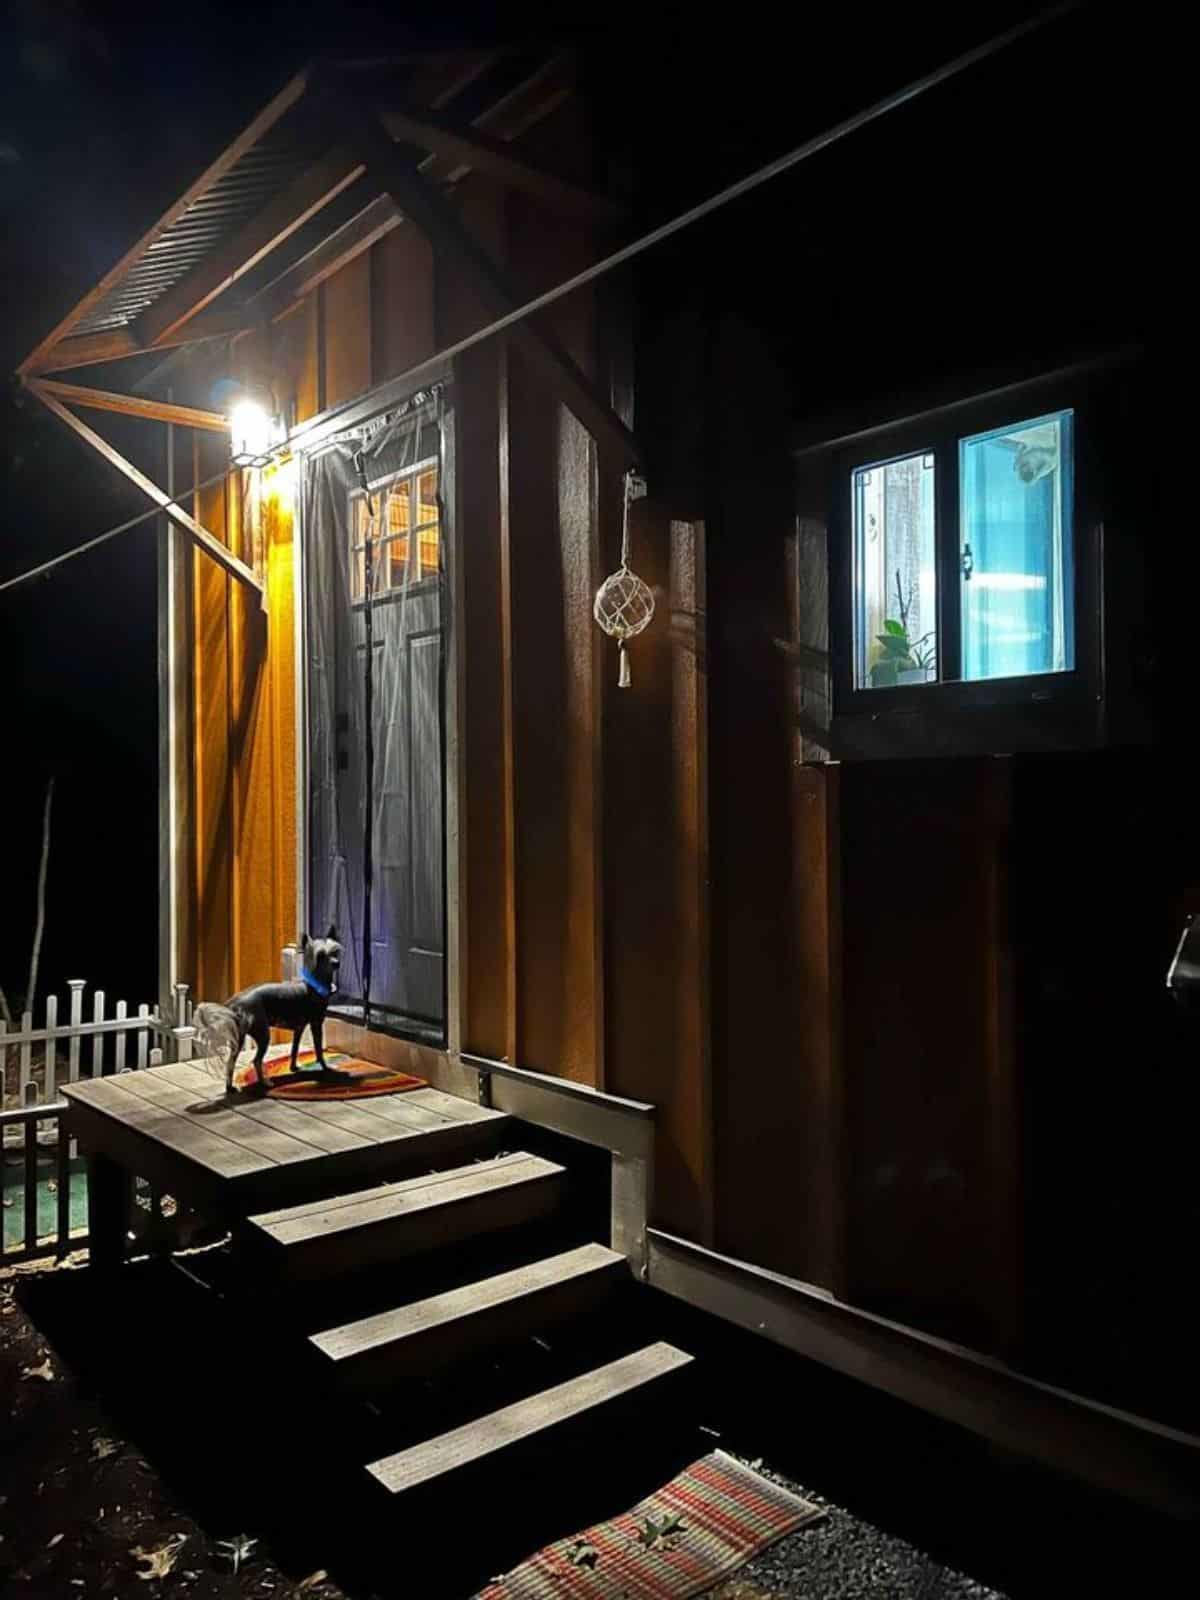 Small porch outside the main door of 20' Two Bedroom Tiny House